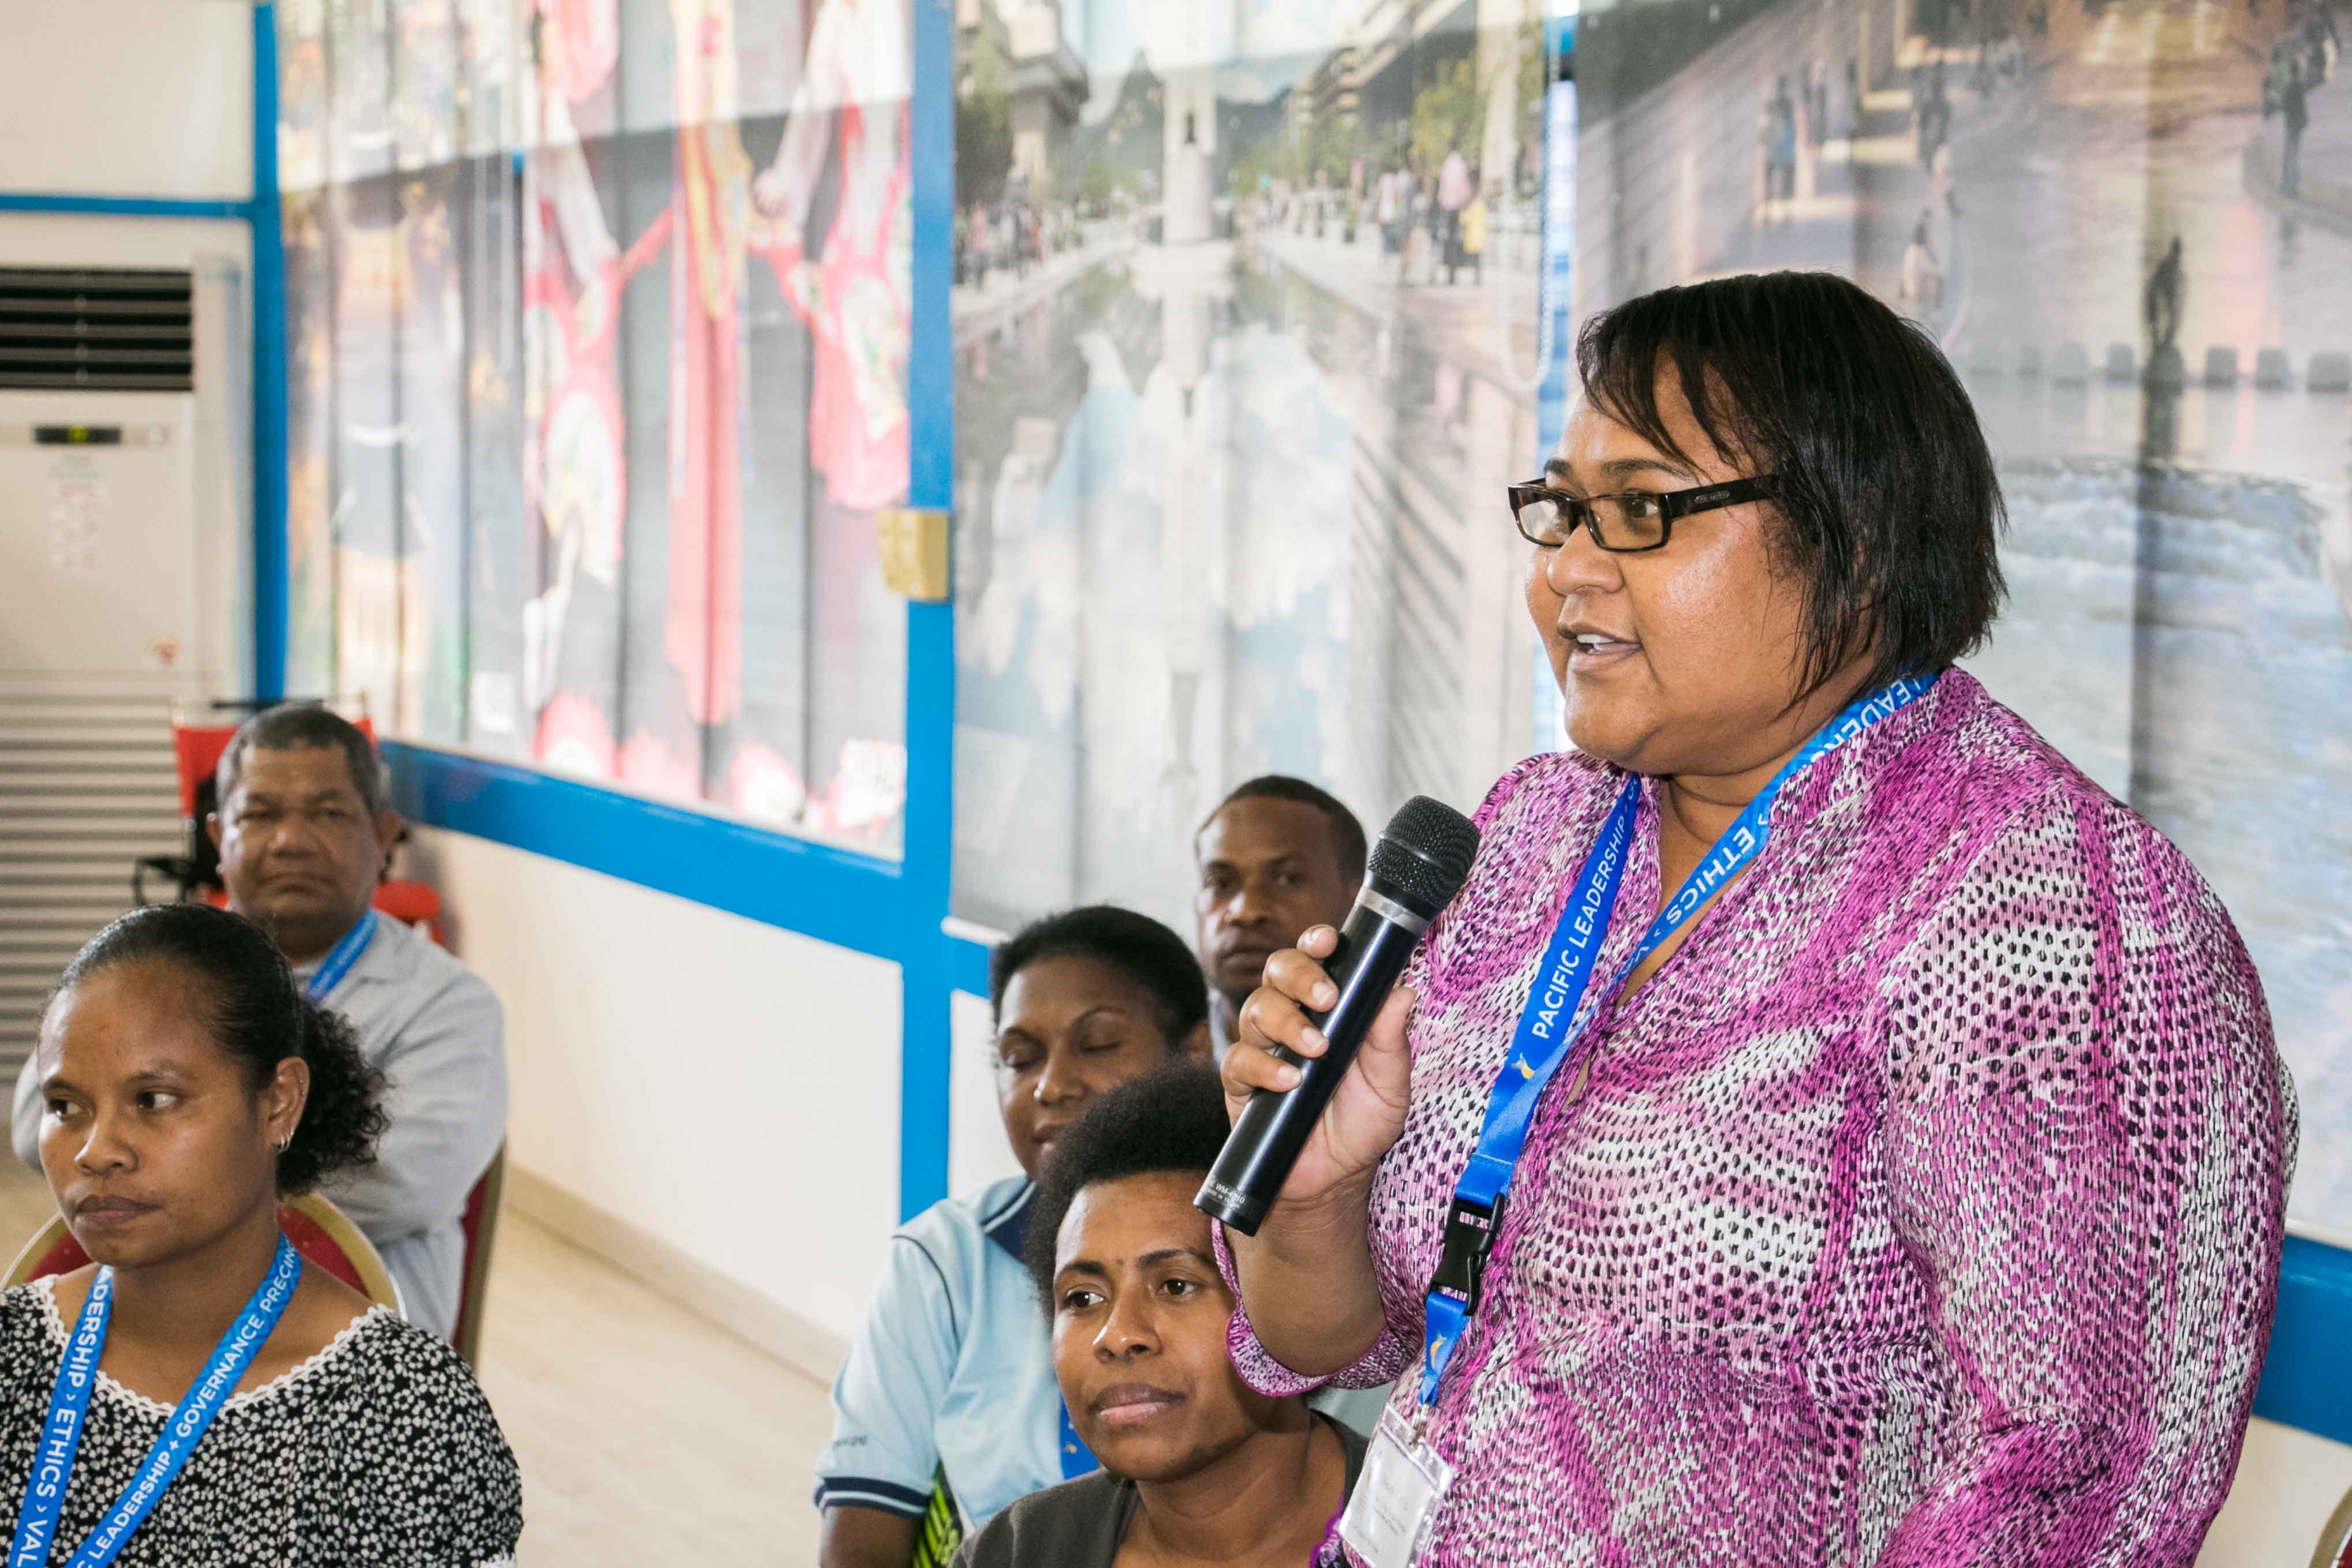 Future Leaders Program participant Wendy Tom Isu, Acting First Assistant Secretary at the Department of Treasury, speaks to Dr Stone about being a champion of gender equity in the Papua New Guinea public service